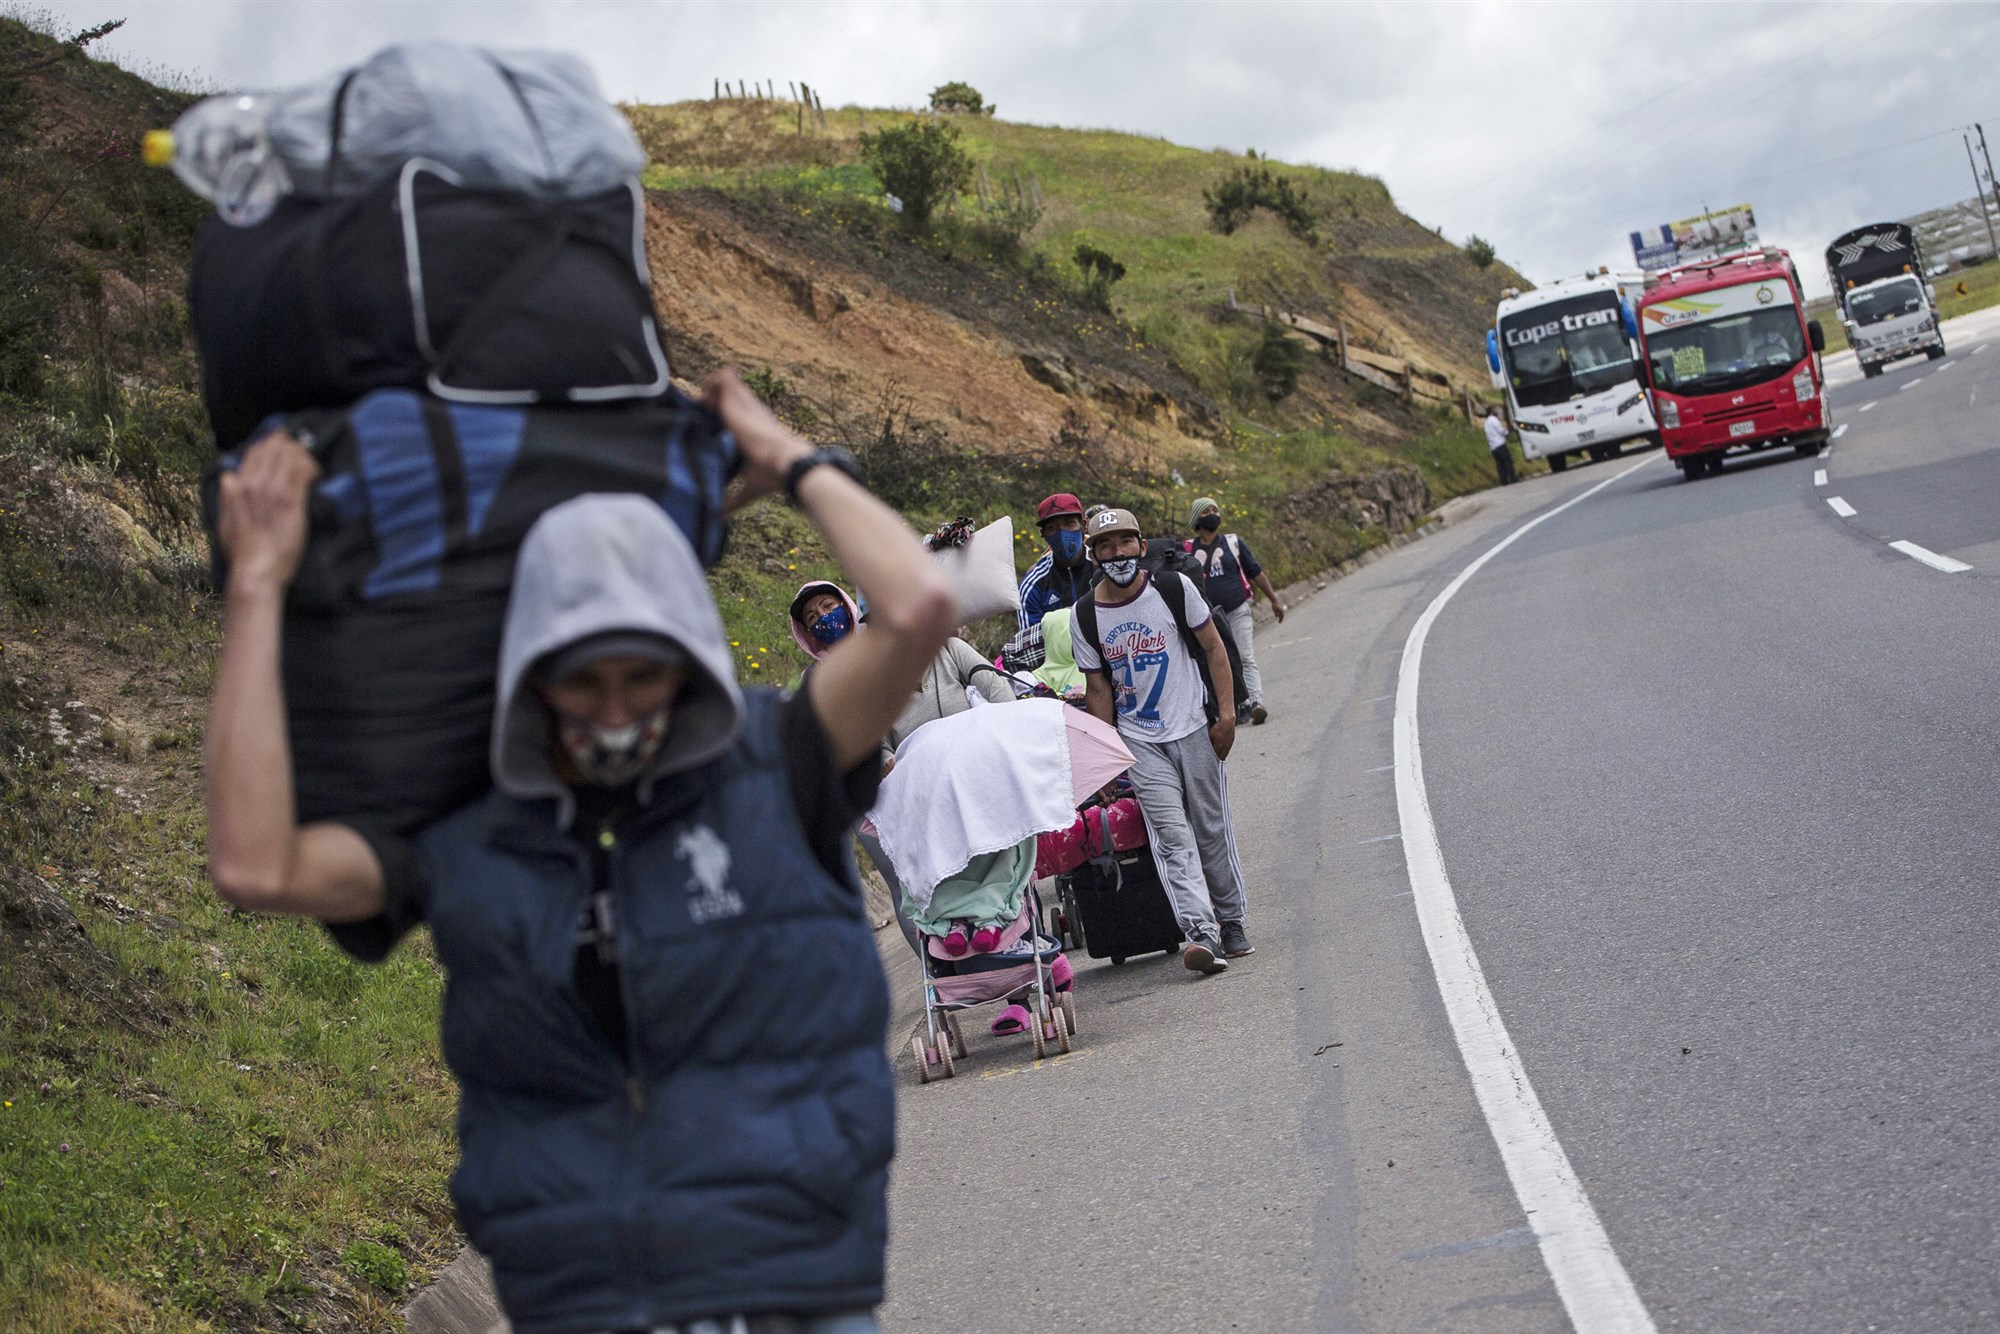 Venezuelans start fleeing country again after months of Covid lockdowns